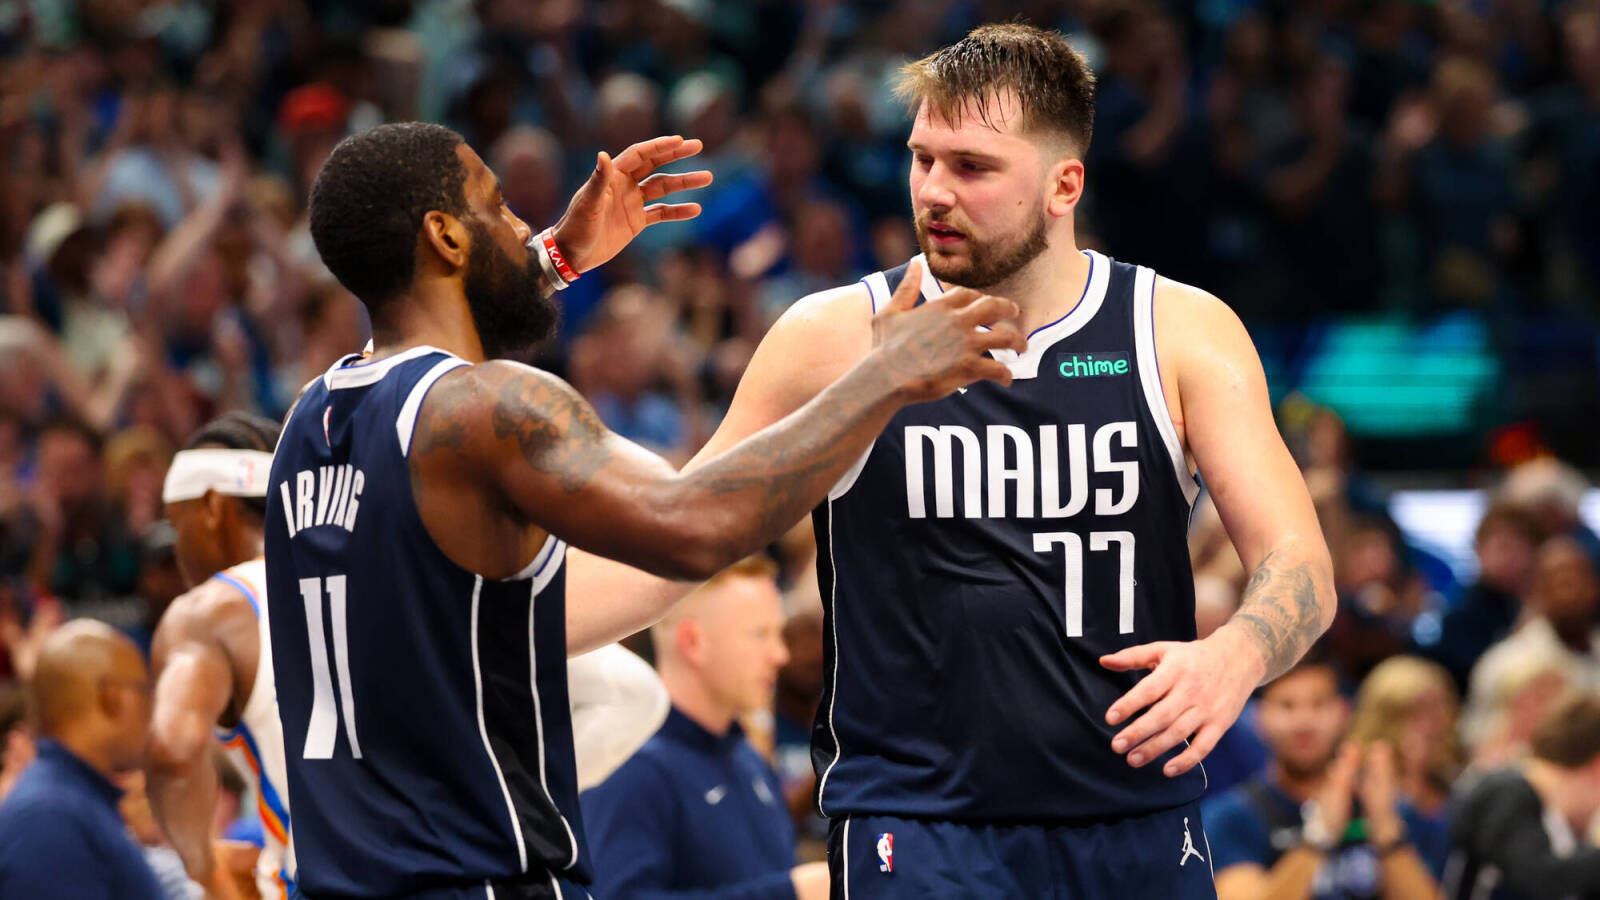 Mavericks come from behind to down Thunder, take 2-1 series lead